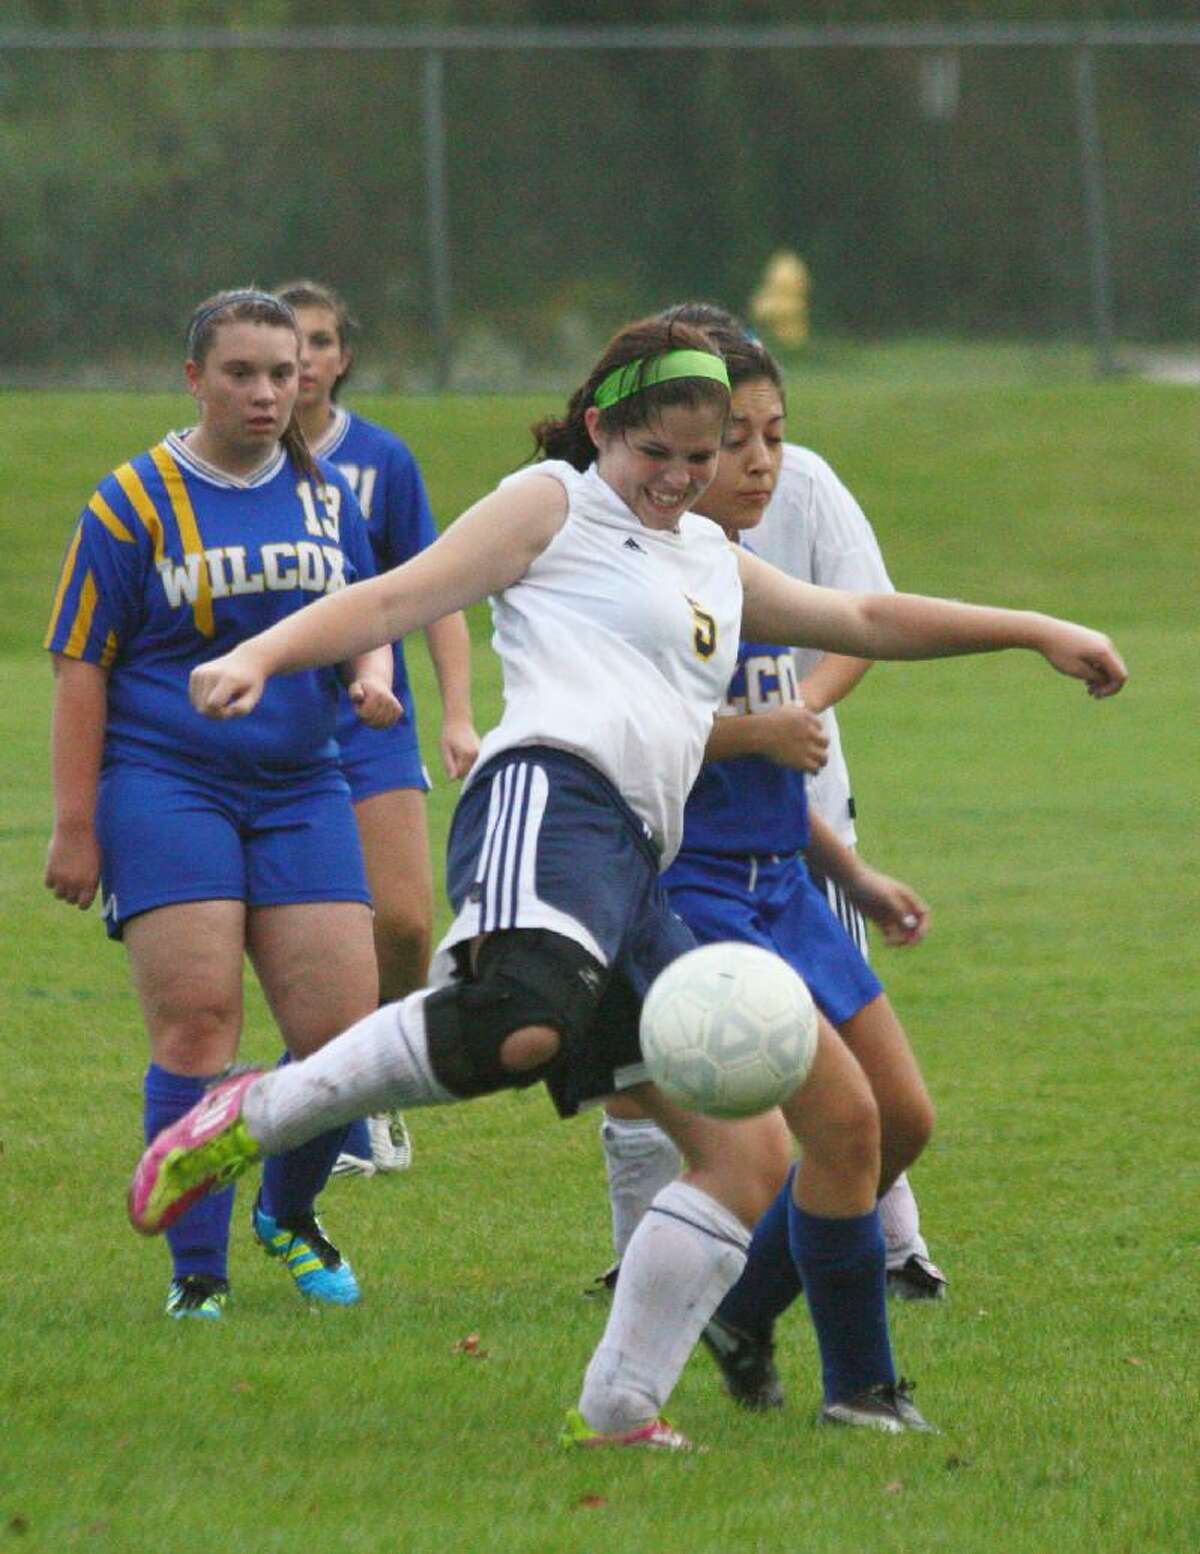 MARIANNE KILLACKEY/Register Citizen Correspondent Wolcott Tech's Melissa Pfeffer (5) looks to kick the ball during Wednesday afternoon's match against Wilcox Tech in Torrington. Wolcott Tech lost 1-0.